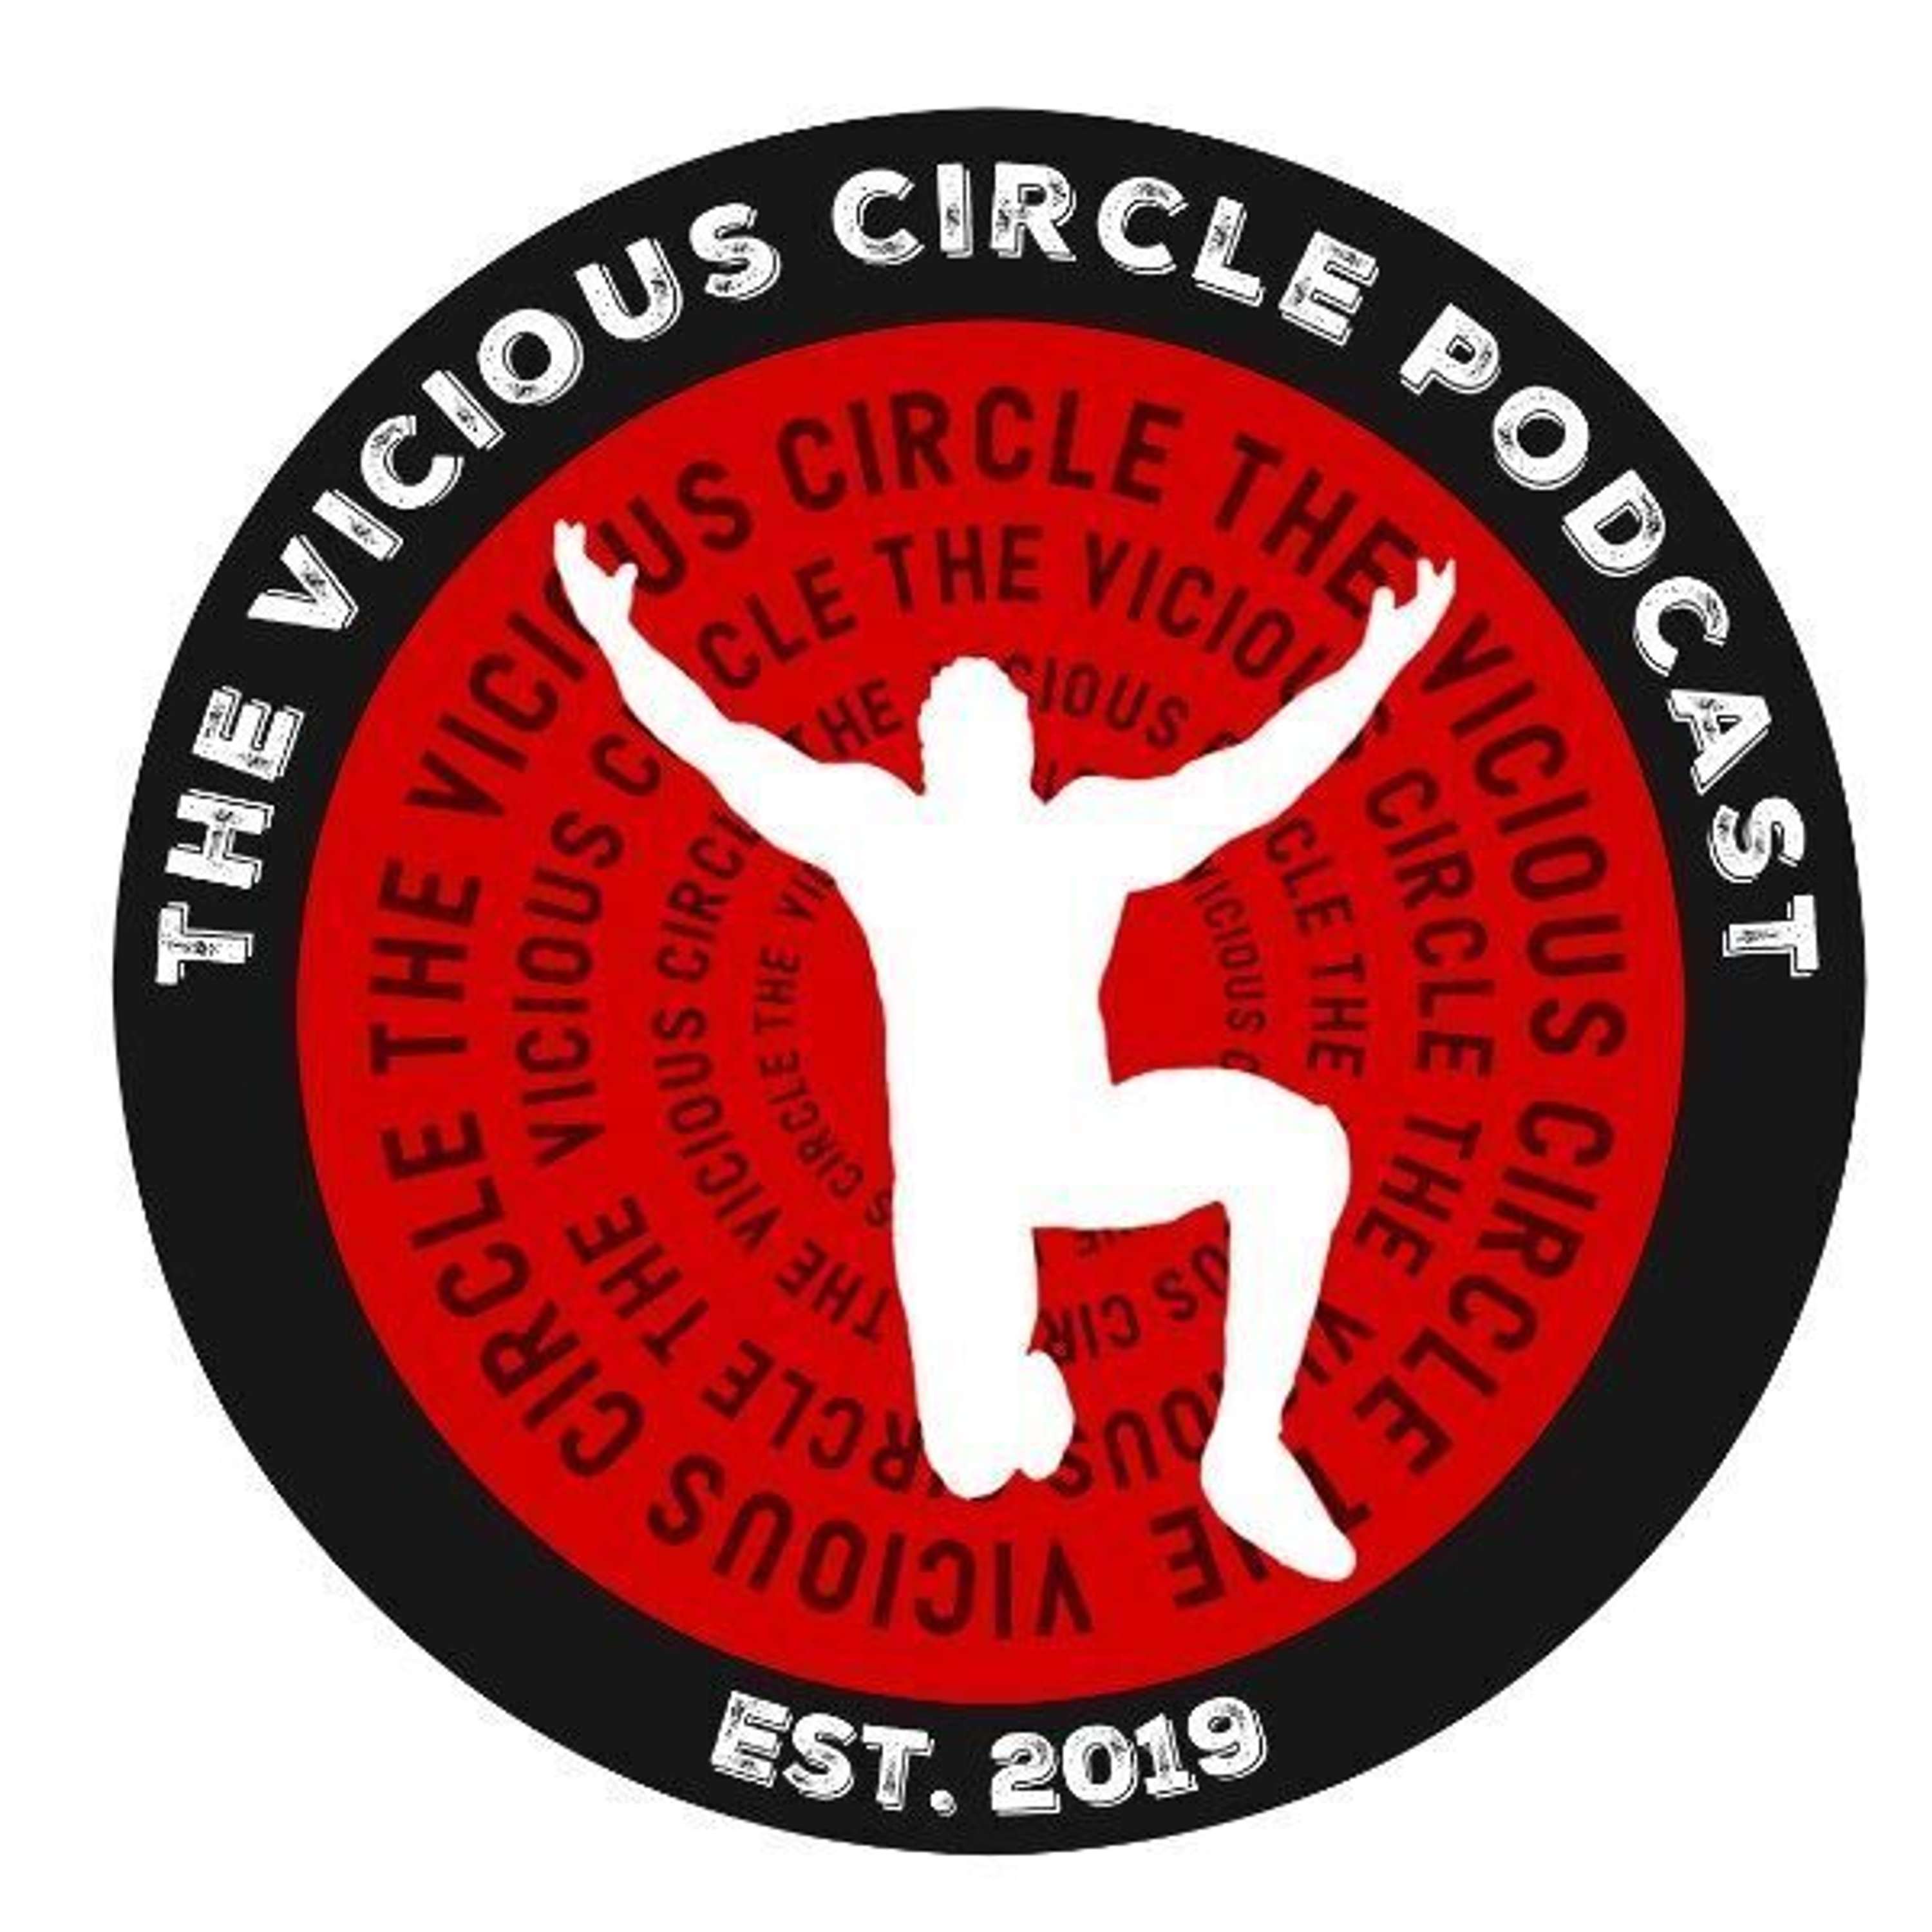 The Vicious Circle #83 – Back on the air, we hope